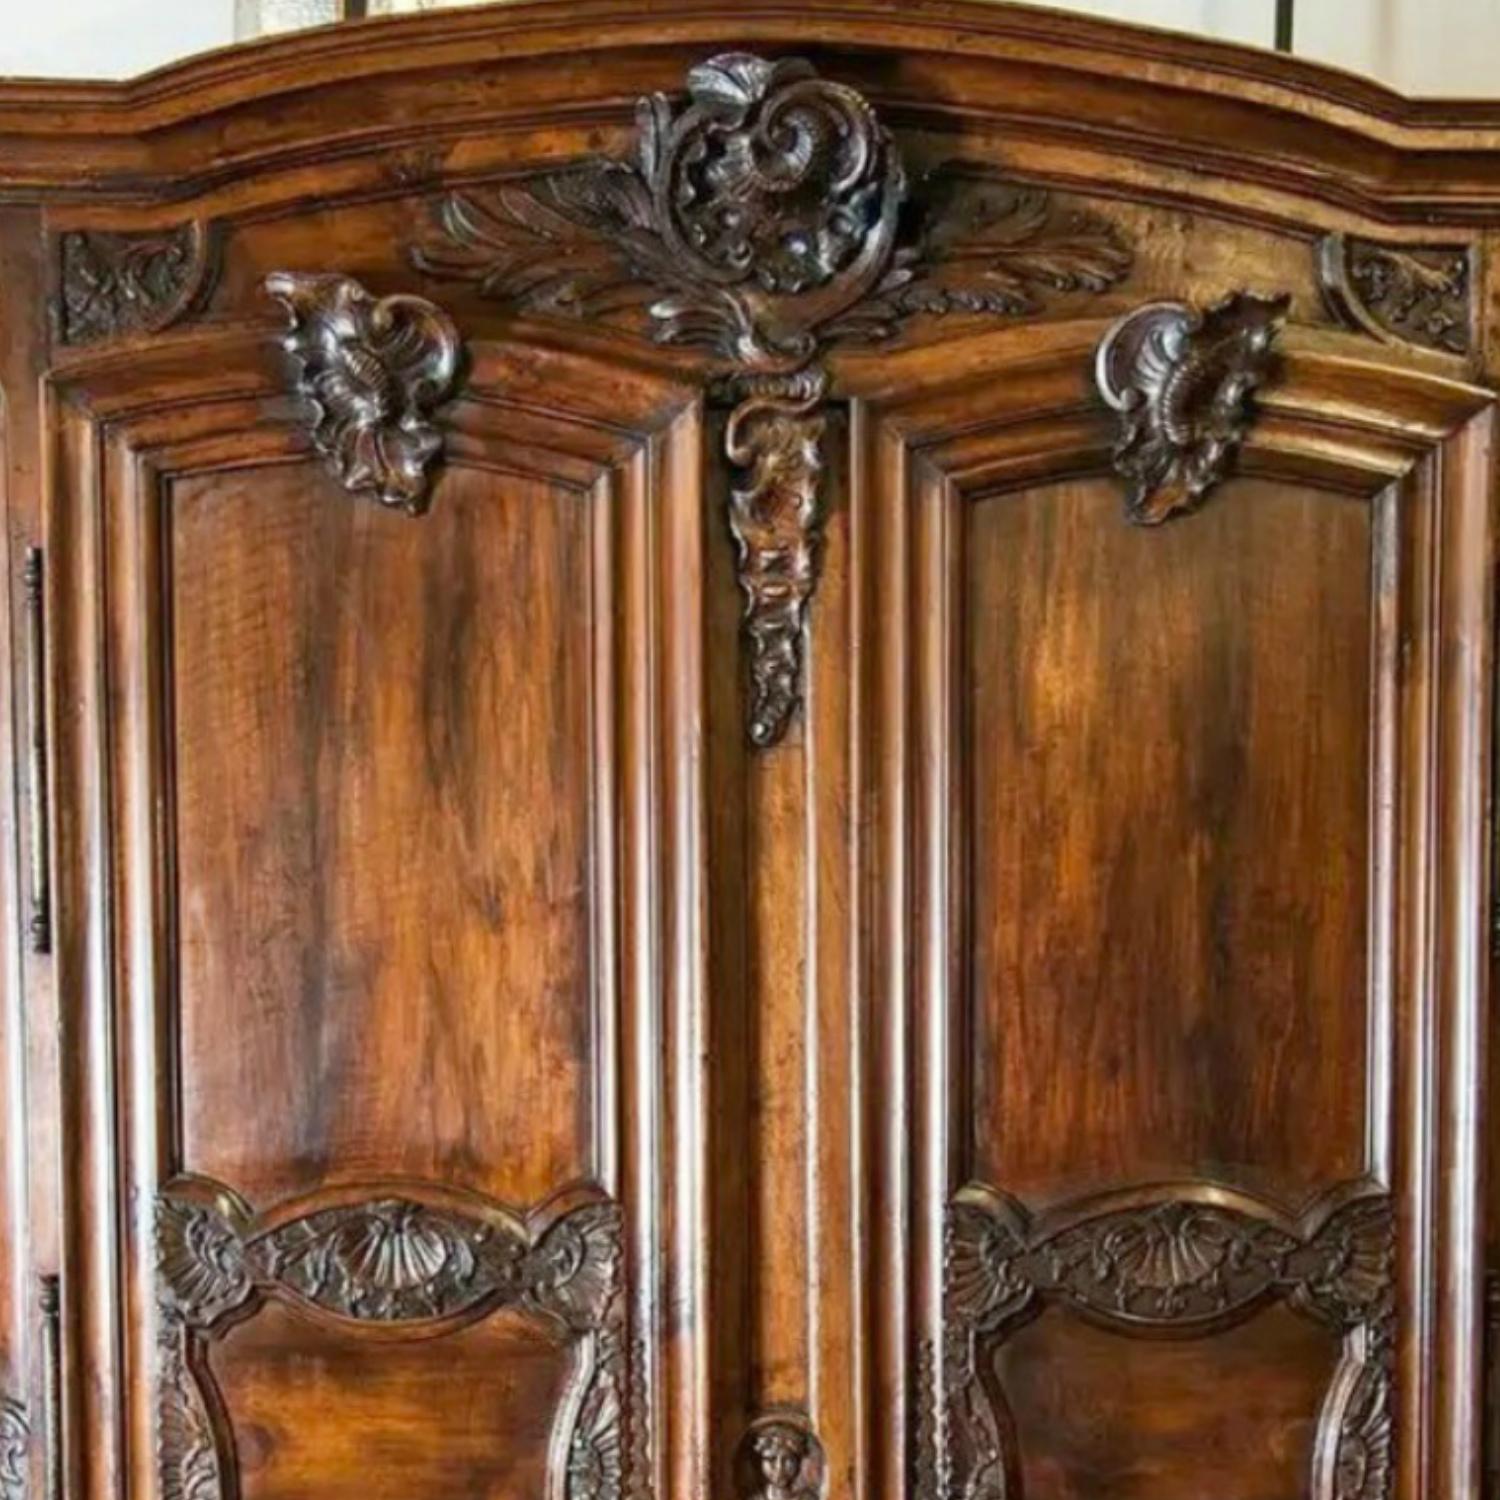 Regency Exceptional 18th Century French Régence Period Walnut Chateau Lyonnaise Armoire For Sale